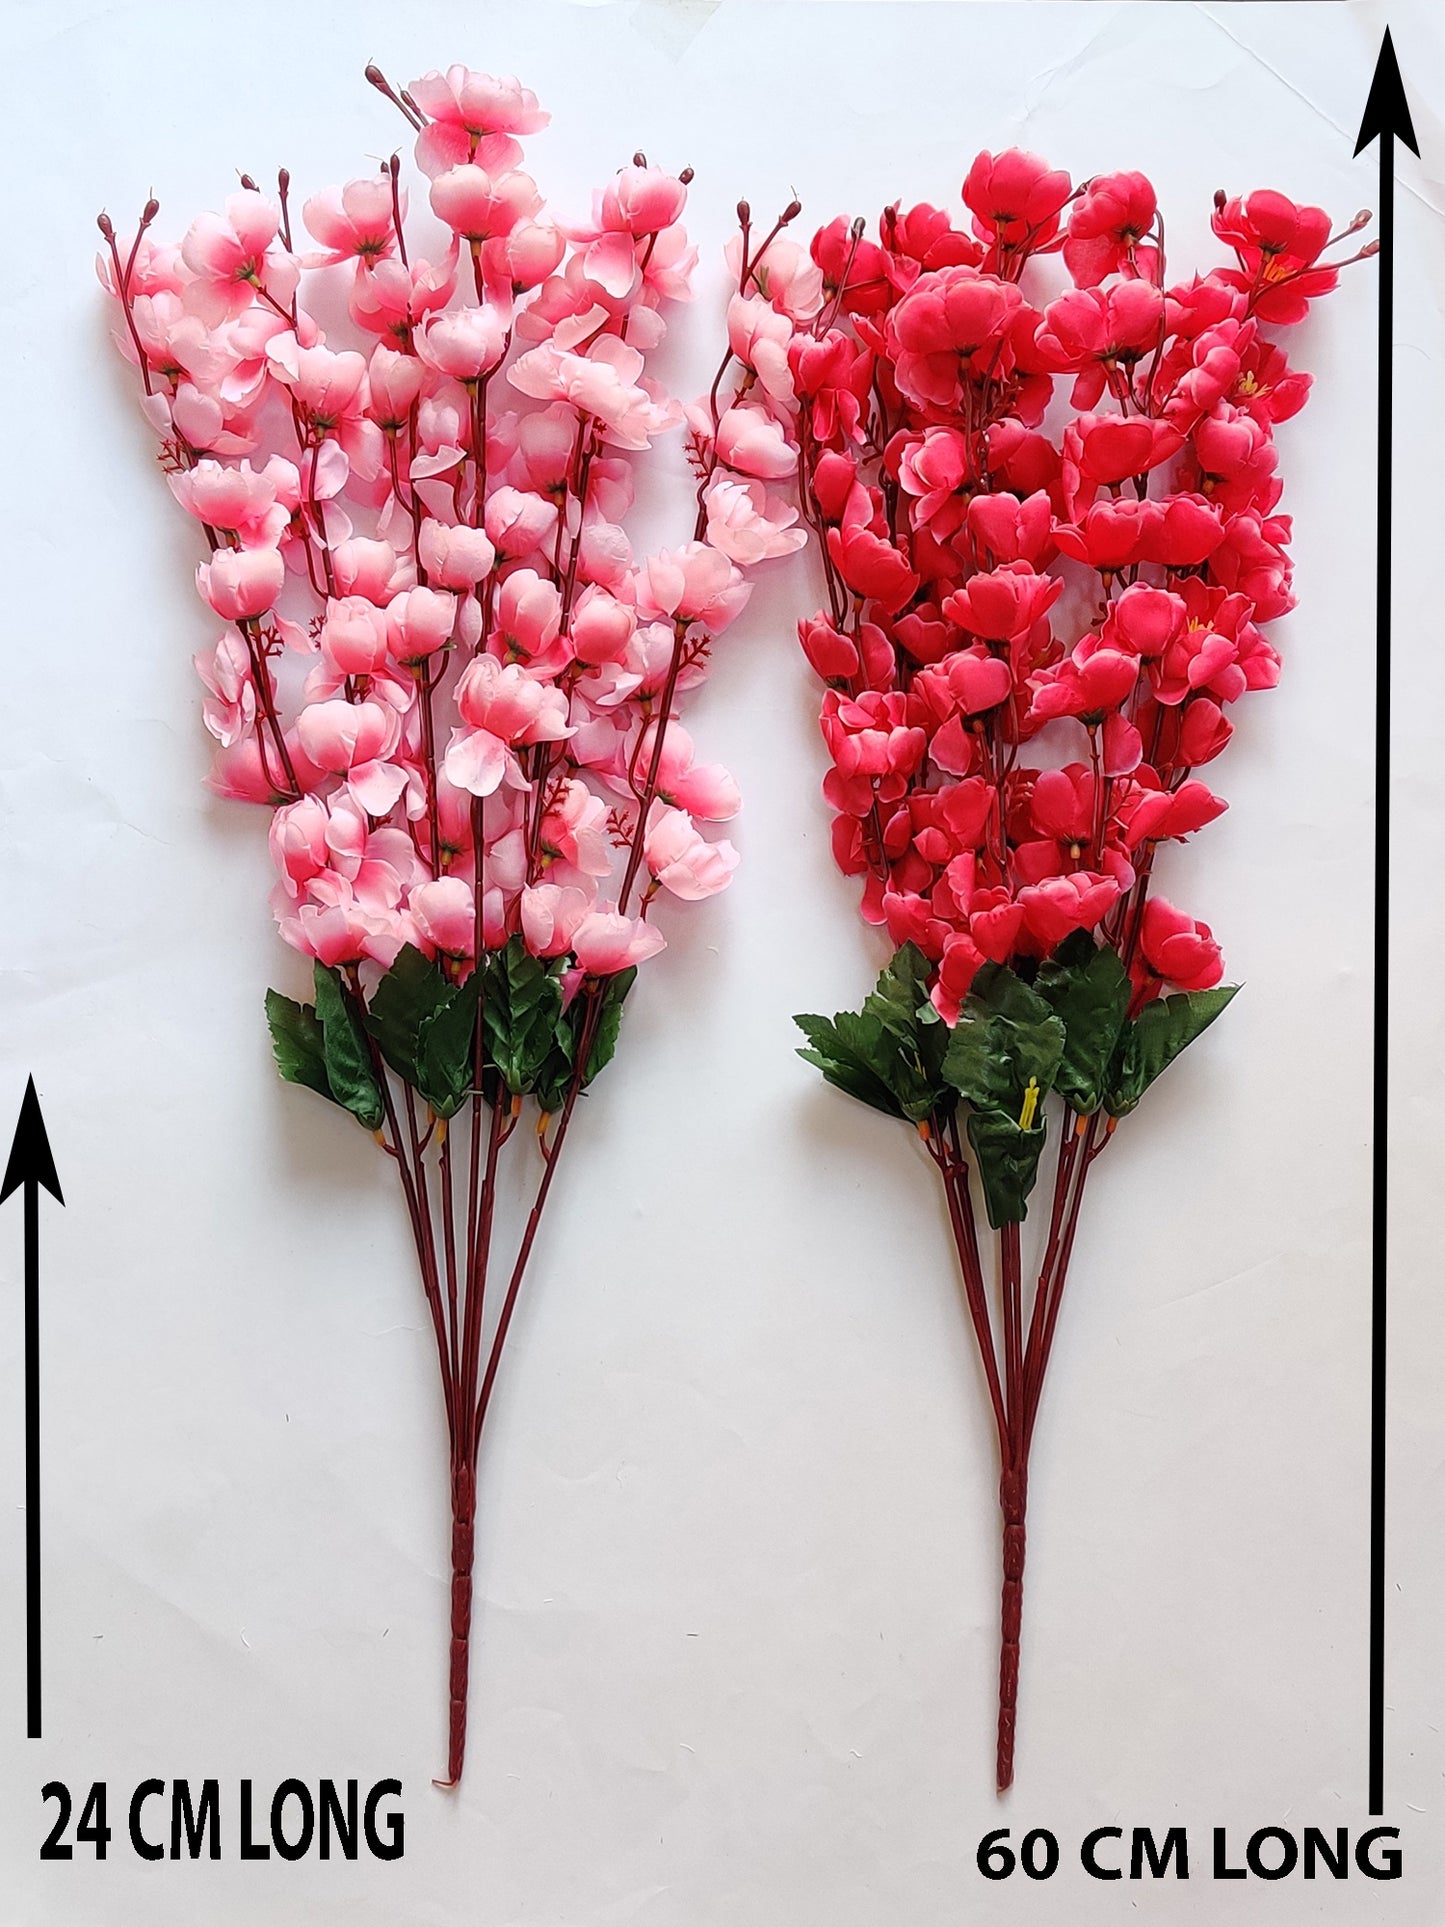 ARTSY® Artificial Flowers For Home Decoration Cherry Blossom Flower Bunch For Vase , Office Decor, Without Vase, Combo, Pack of 2 Pieces